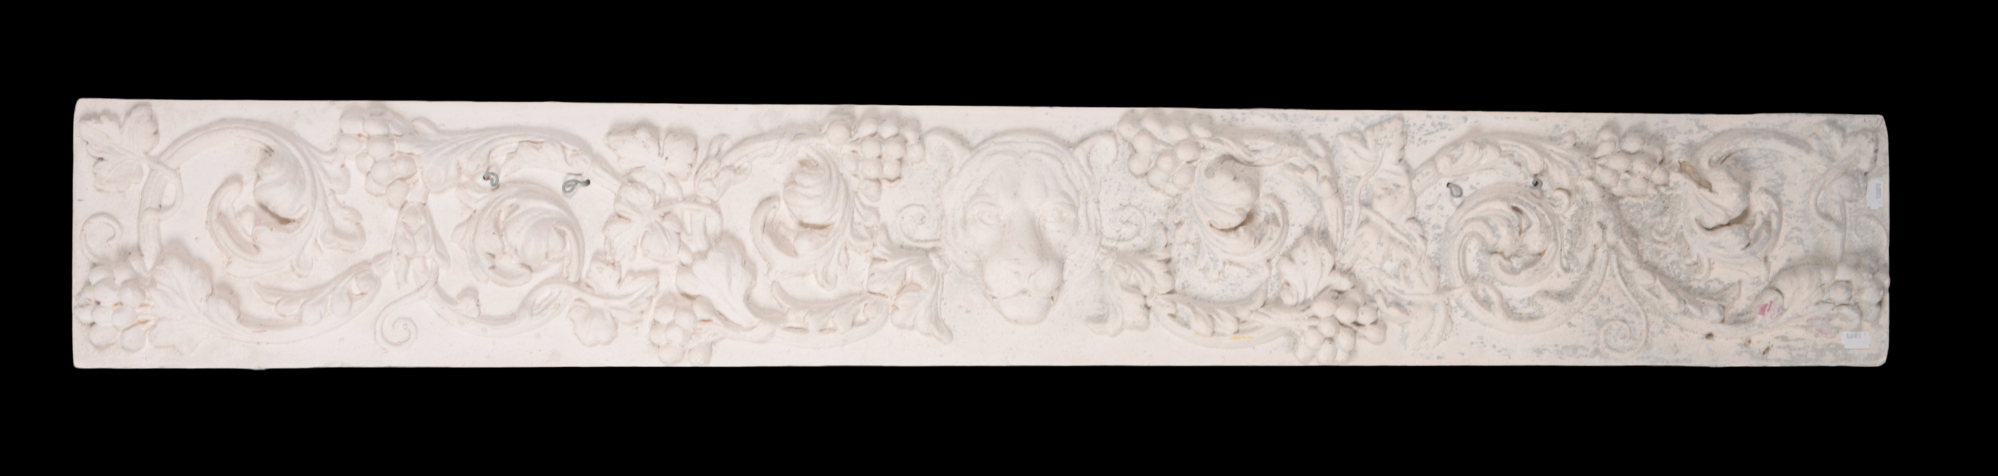 A GROUP OF FIVE PLASTER FRIEZE MOULDINGS - Image 5 of 6